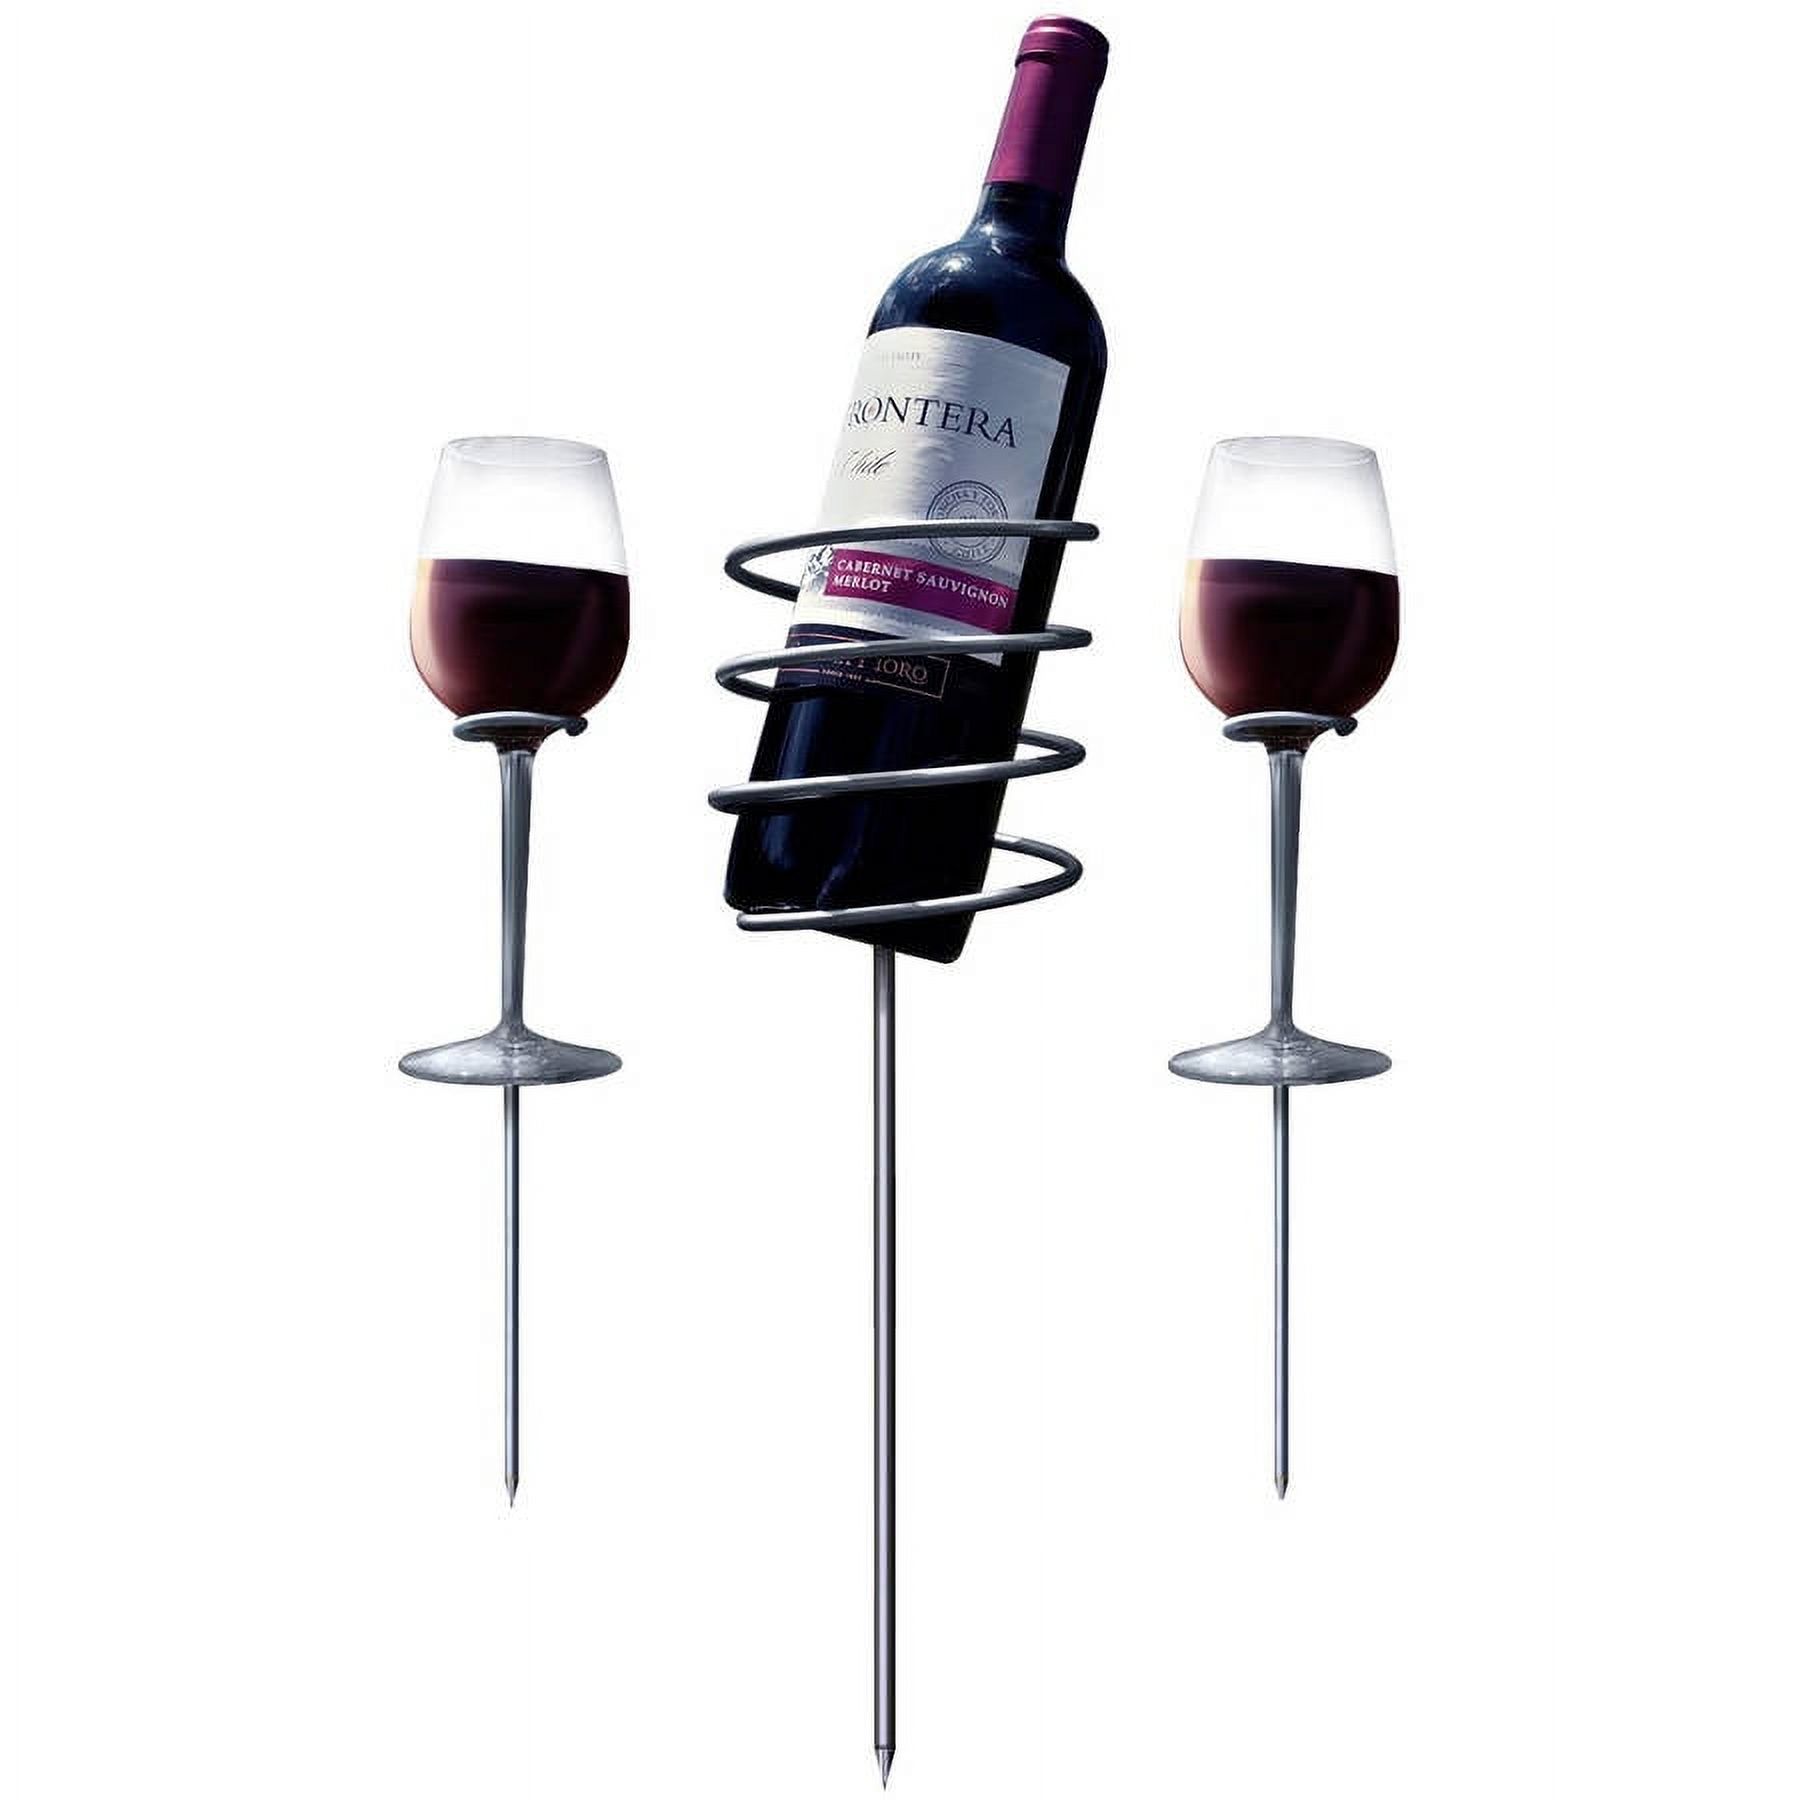 Sorbus Wine Stakes Set, Wine Sticks Holds Bottle and 2 Glasses Preventing Them from Spilling or Breaking, Great for Outdoor Drinking By Picnic, Camping or Party - image 3 of 3